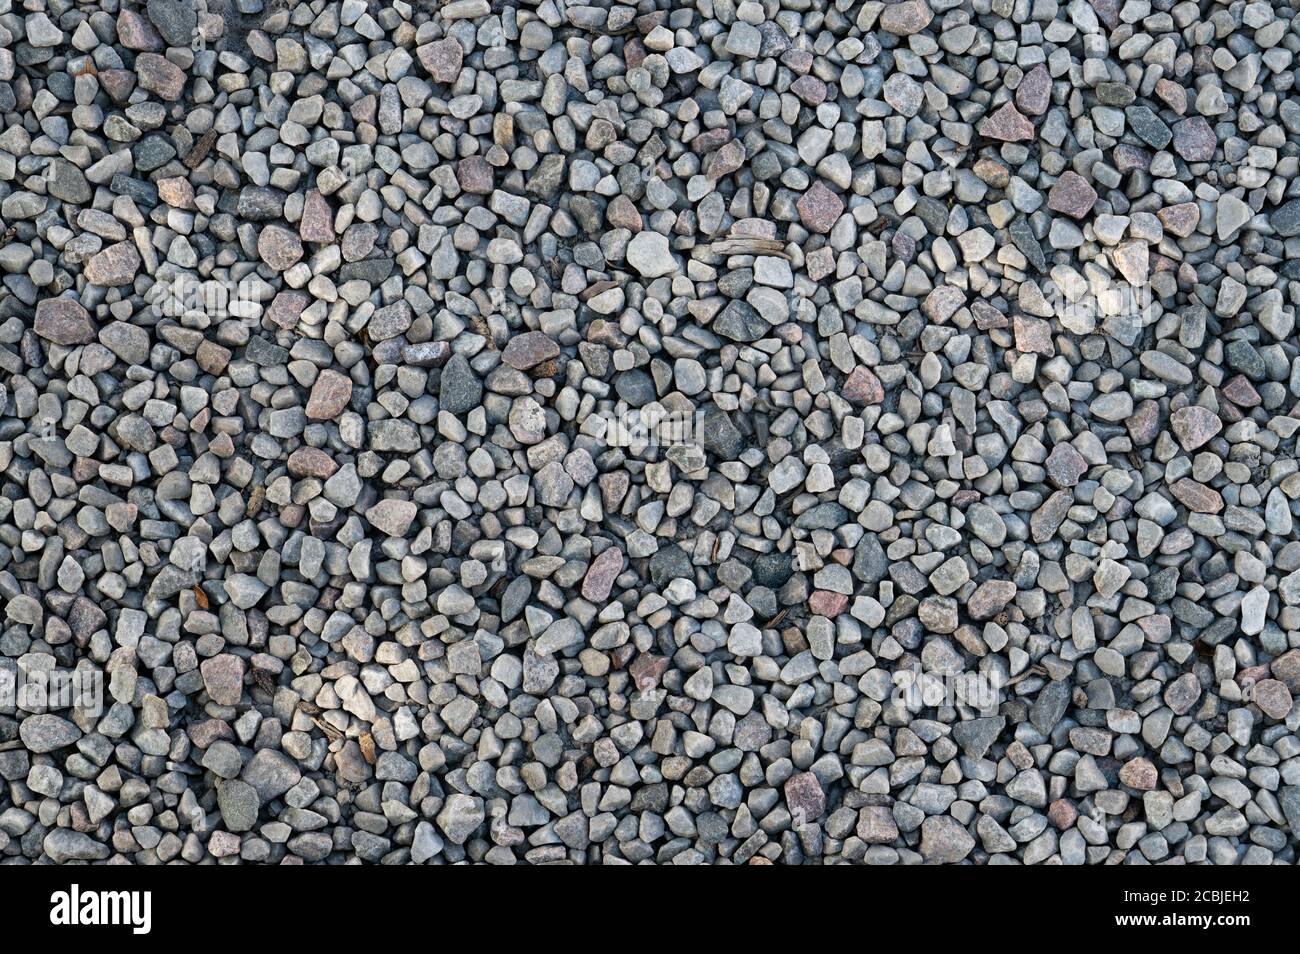 Abstract stone pebble background and texture Stock Photo